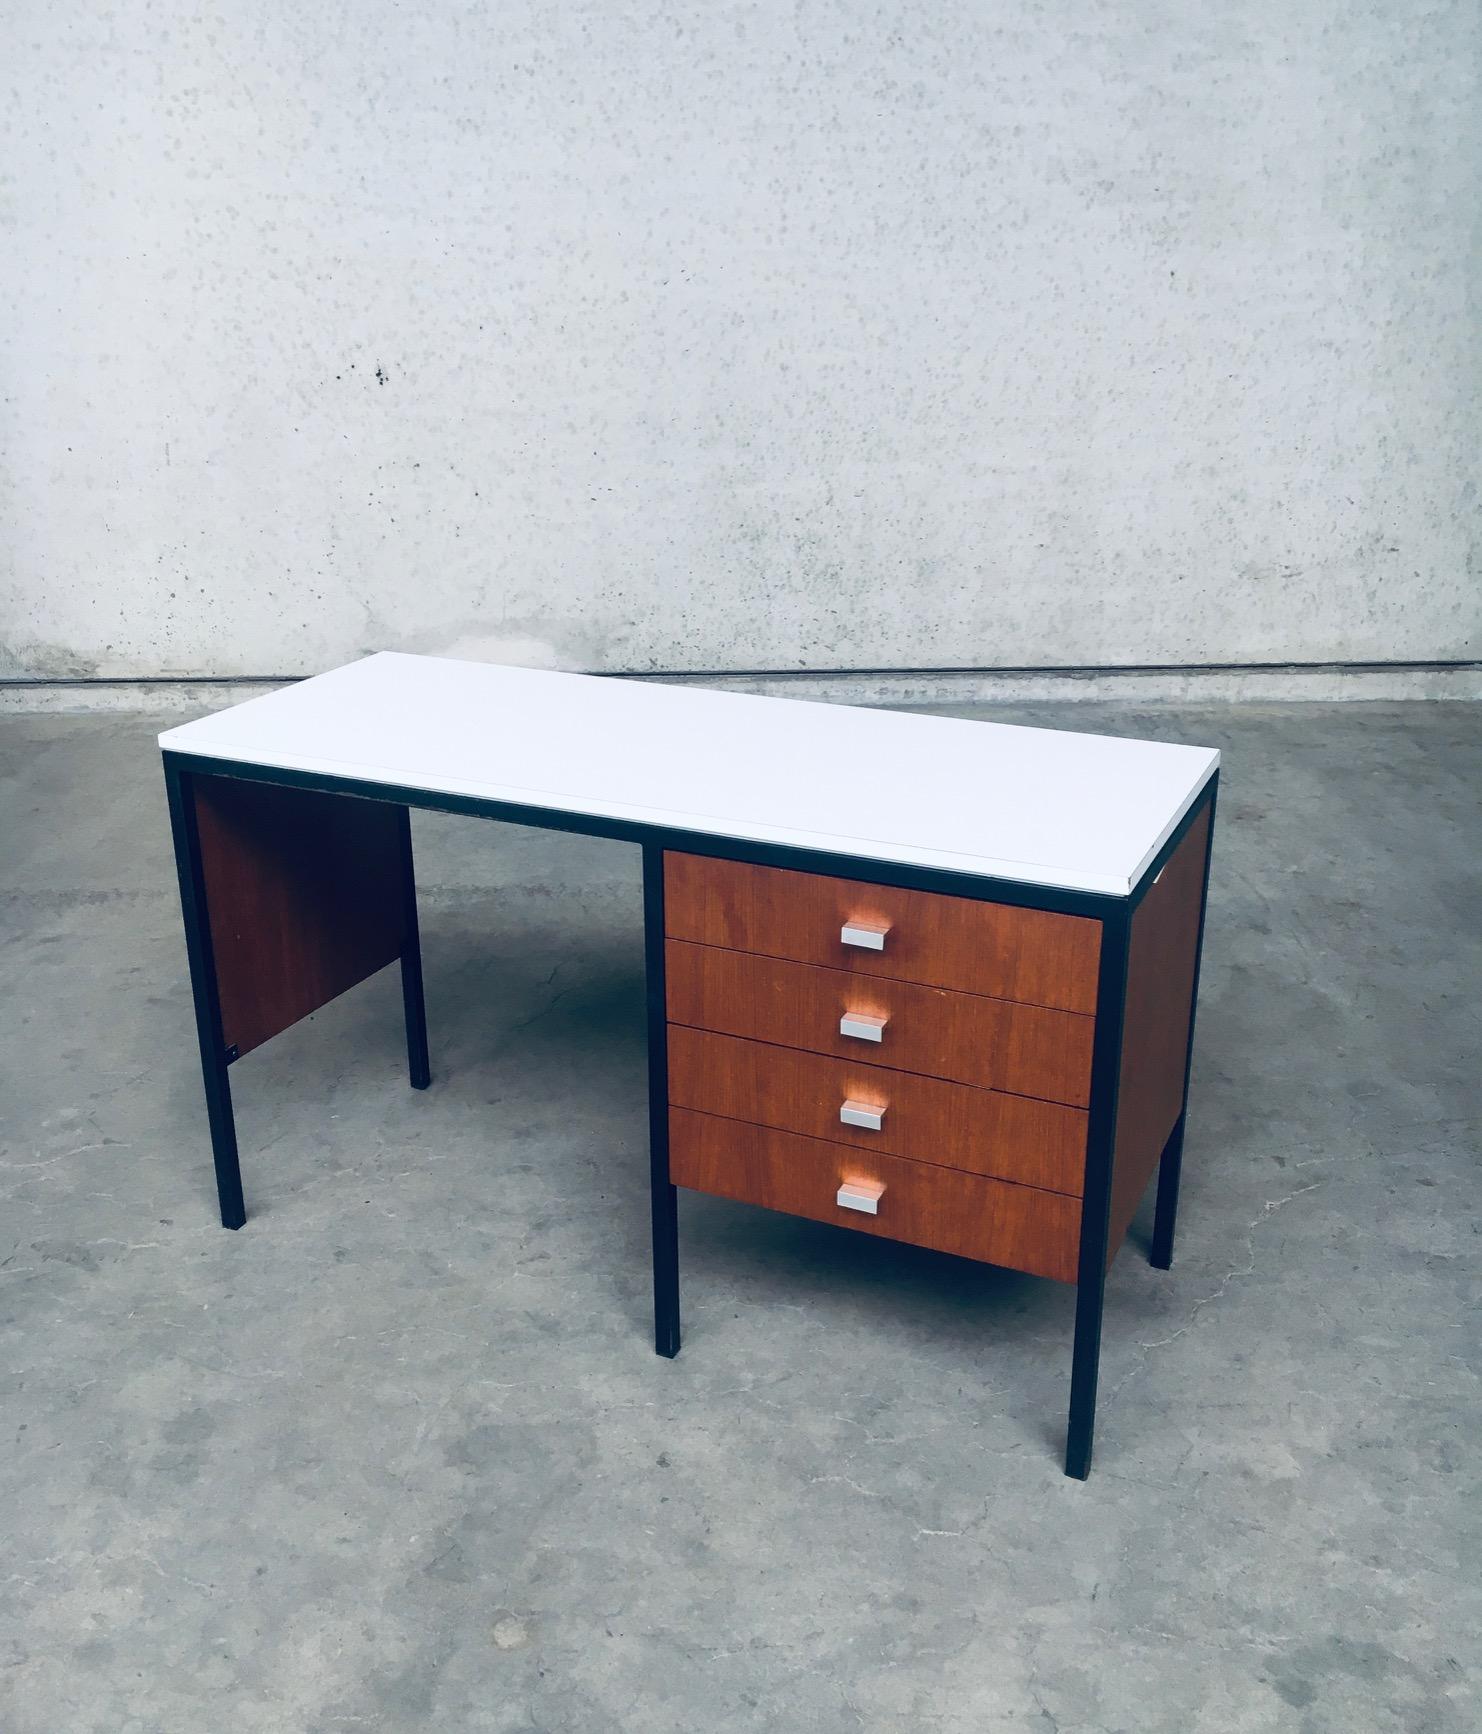 Vintage Mid-Century Modern Dutch Design Desk, made in the Netherlands 1960's. In the style of Pierre Guariche designs. Laminated white top on black stained metal frame with wooden panels and wooden drawers. Architectural and minimalist design on